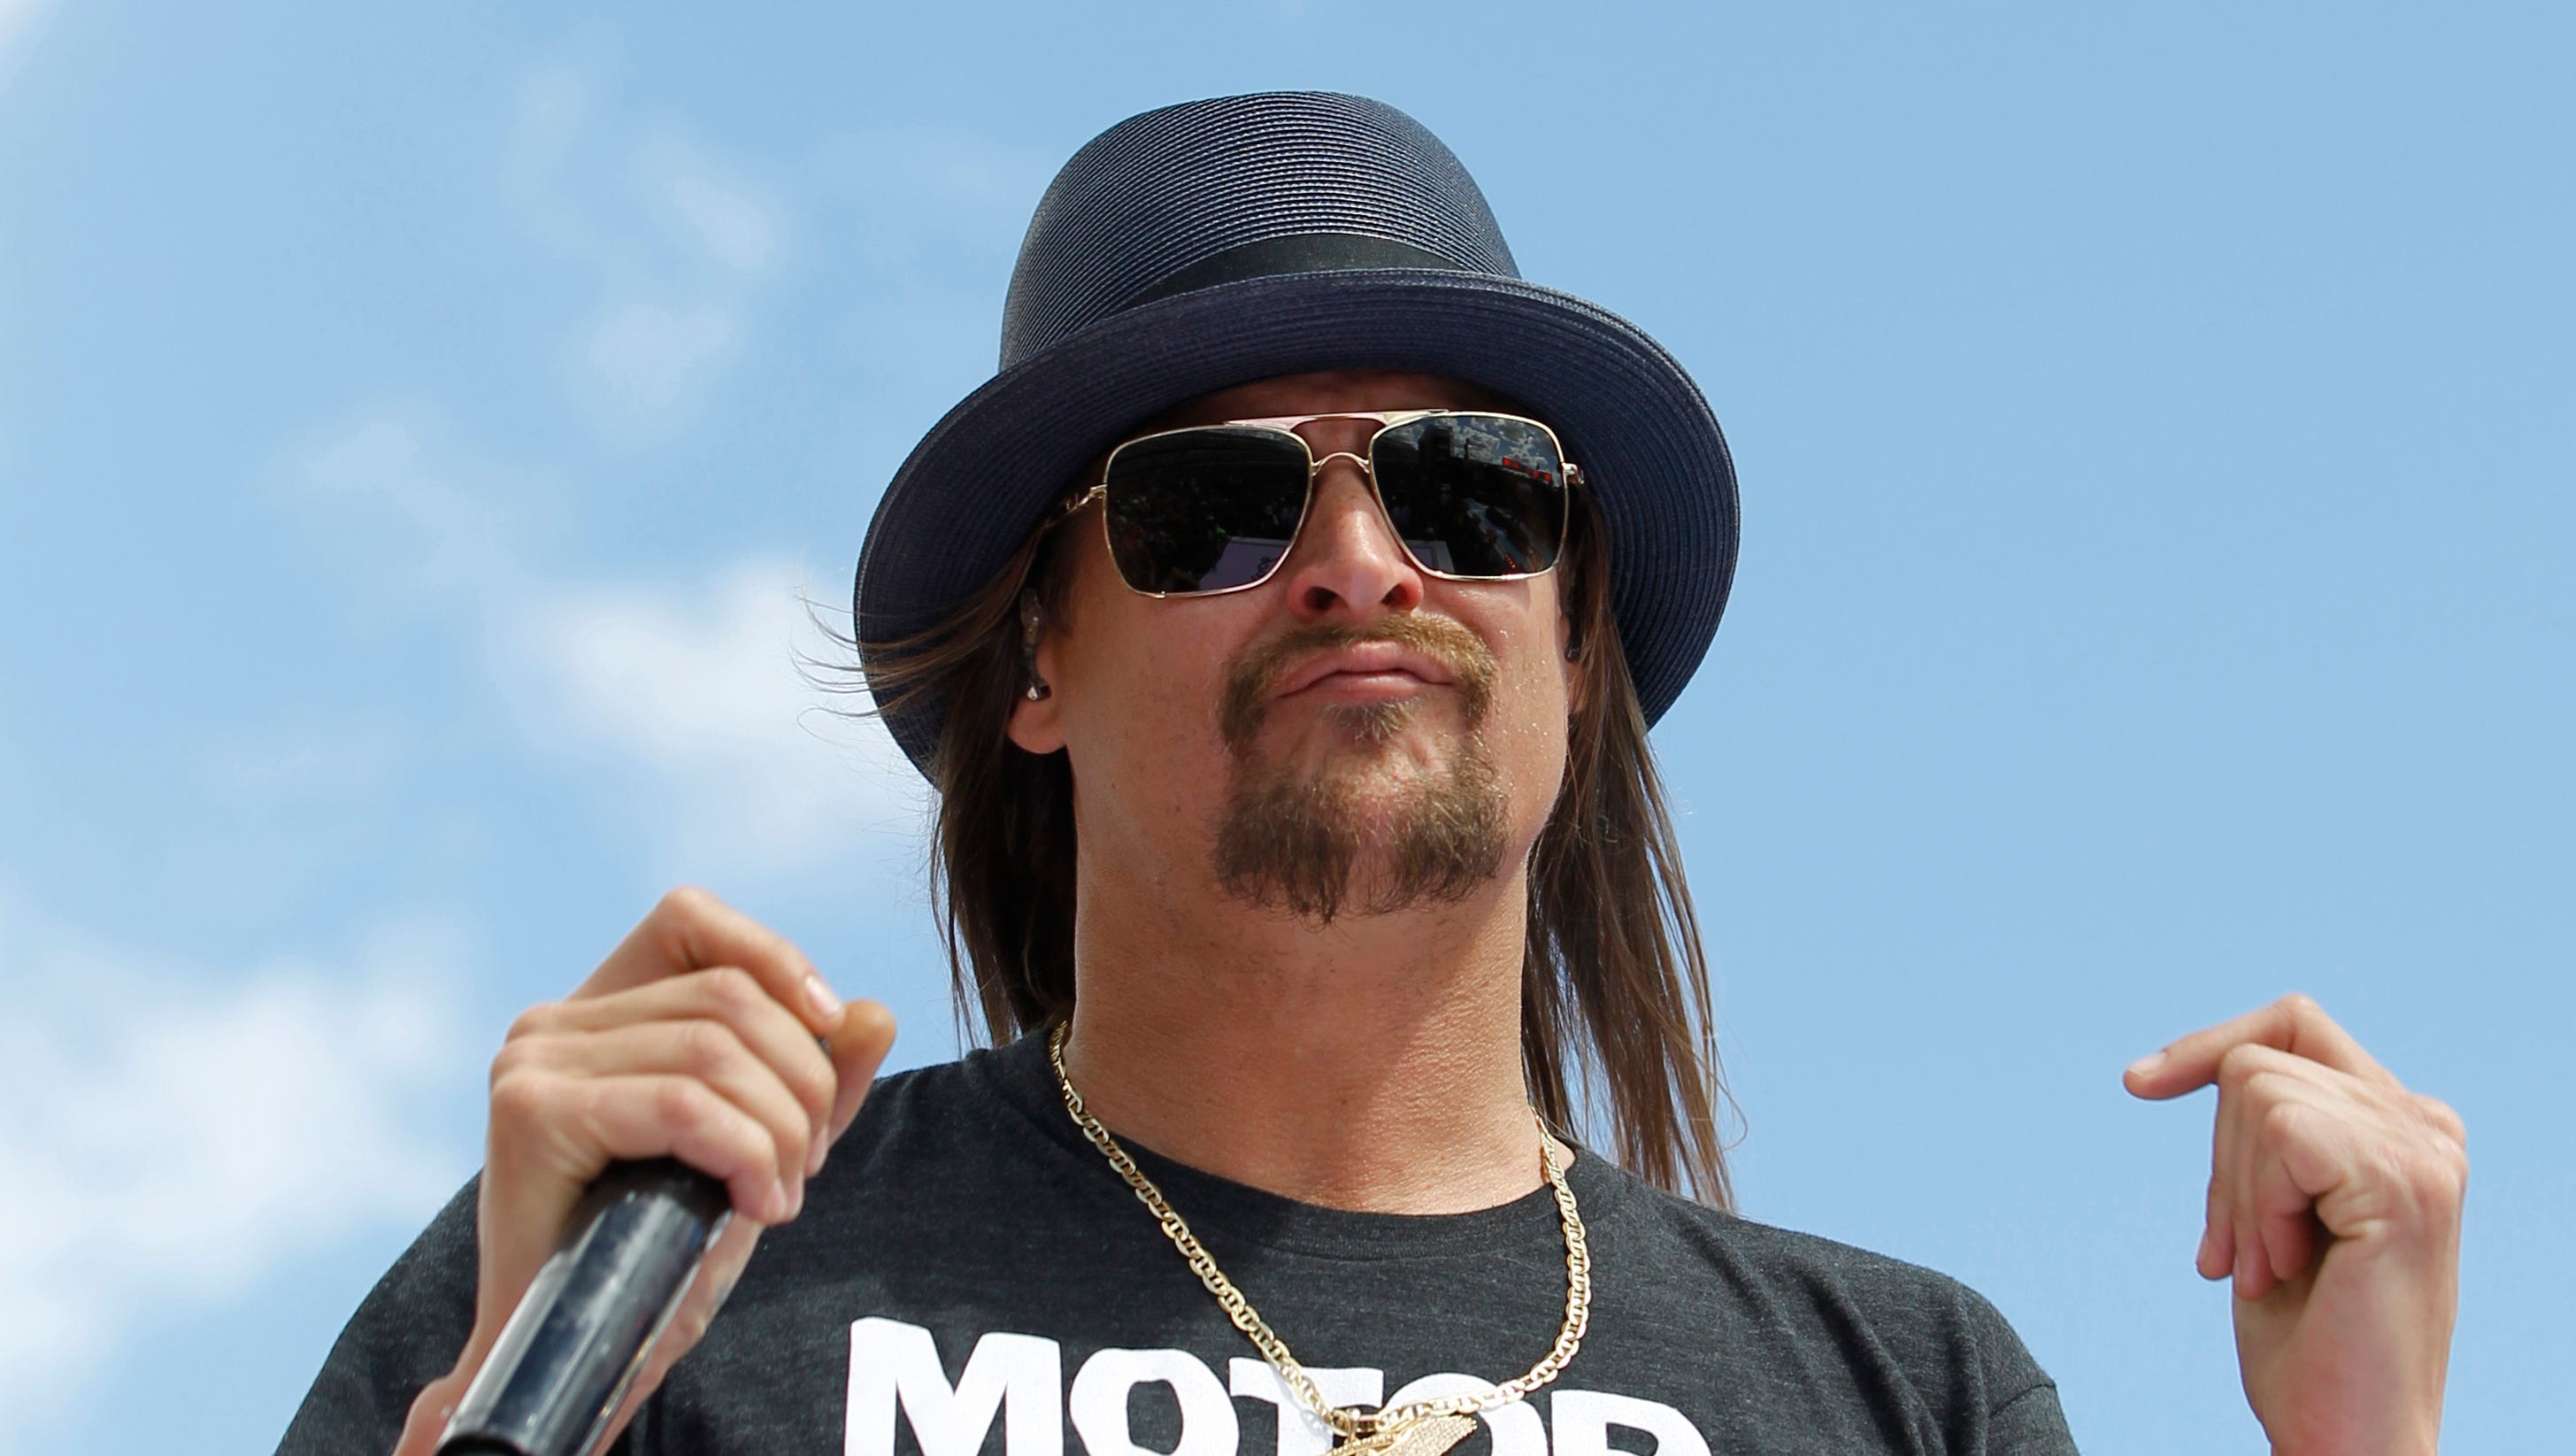 Kid Rock concert after Charlottesville is an affront to Detroiters